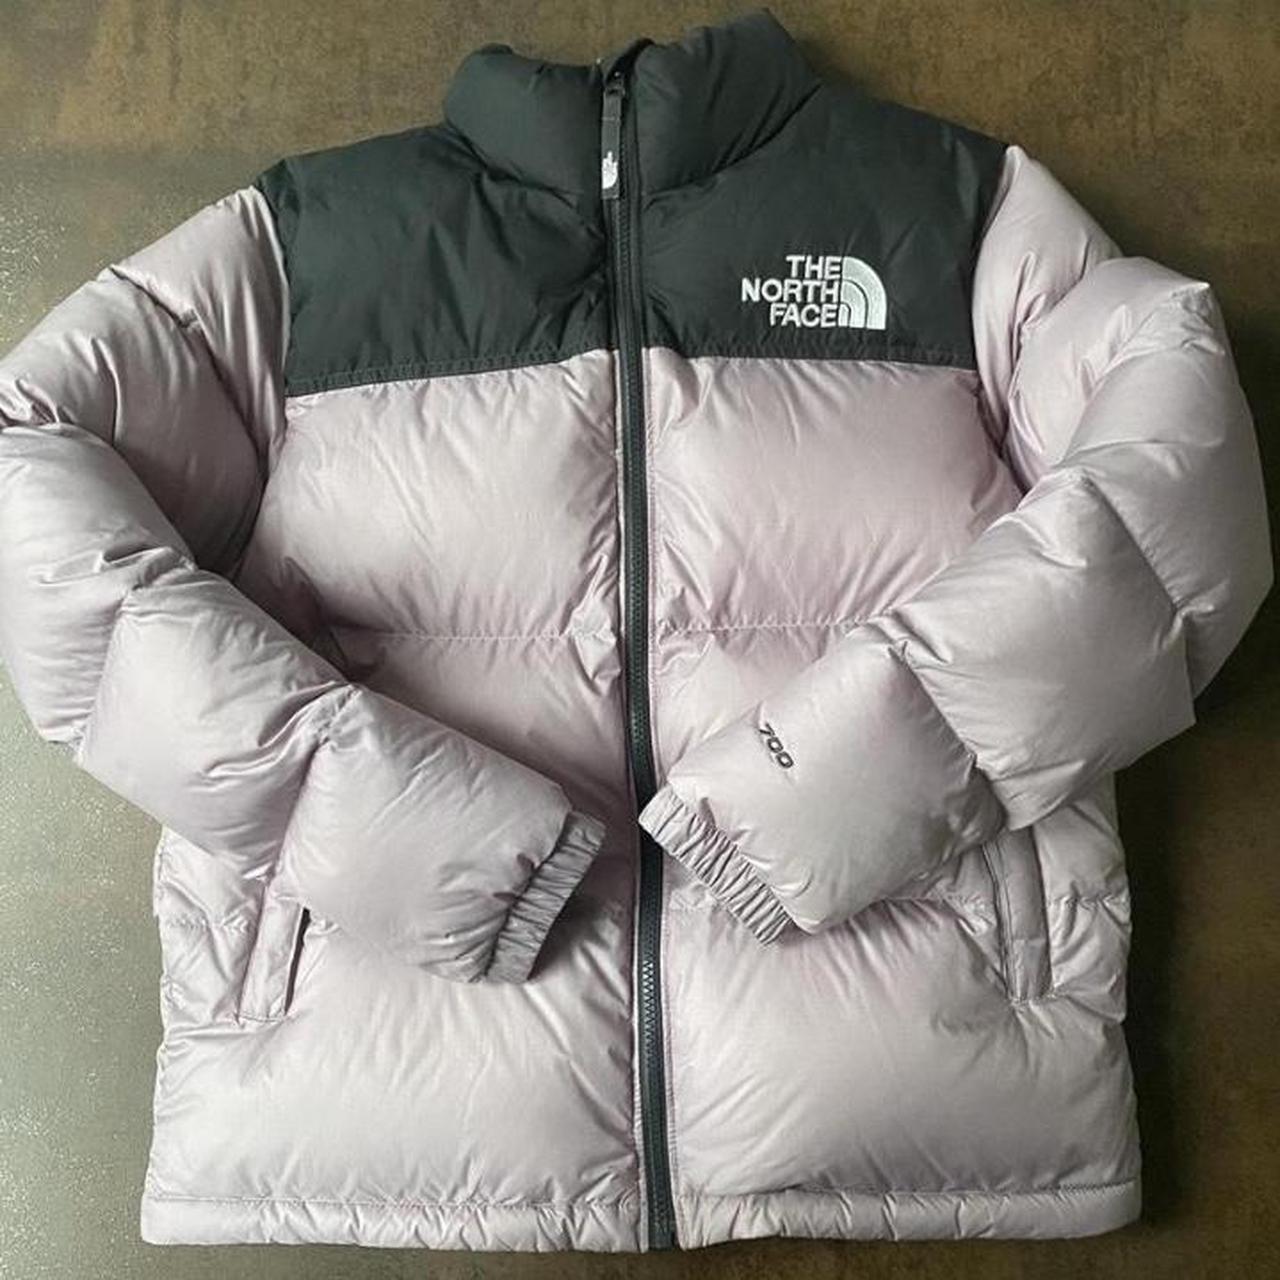 The North Face Women's Purple and Black Coat | Depop